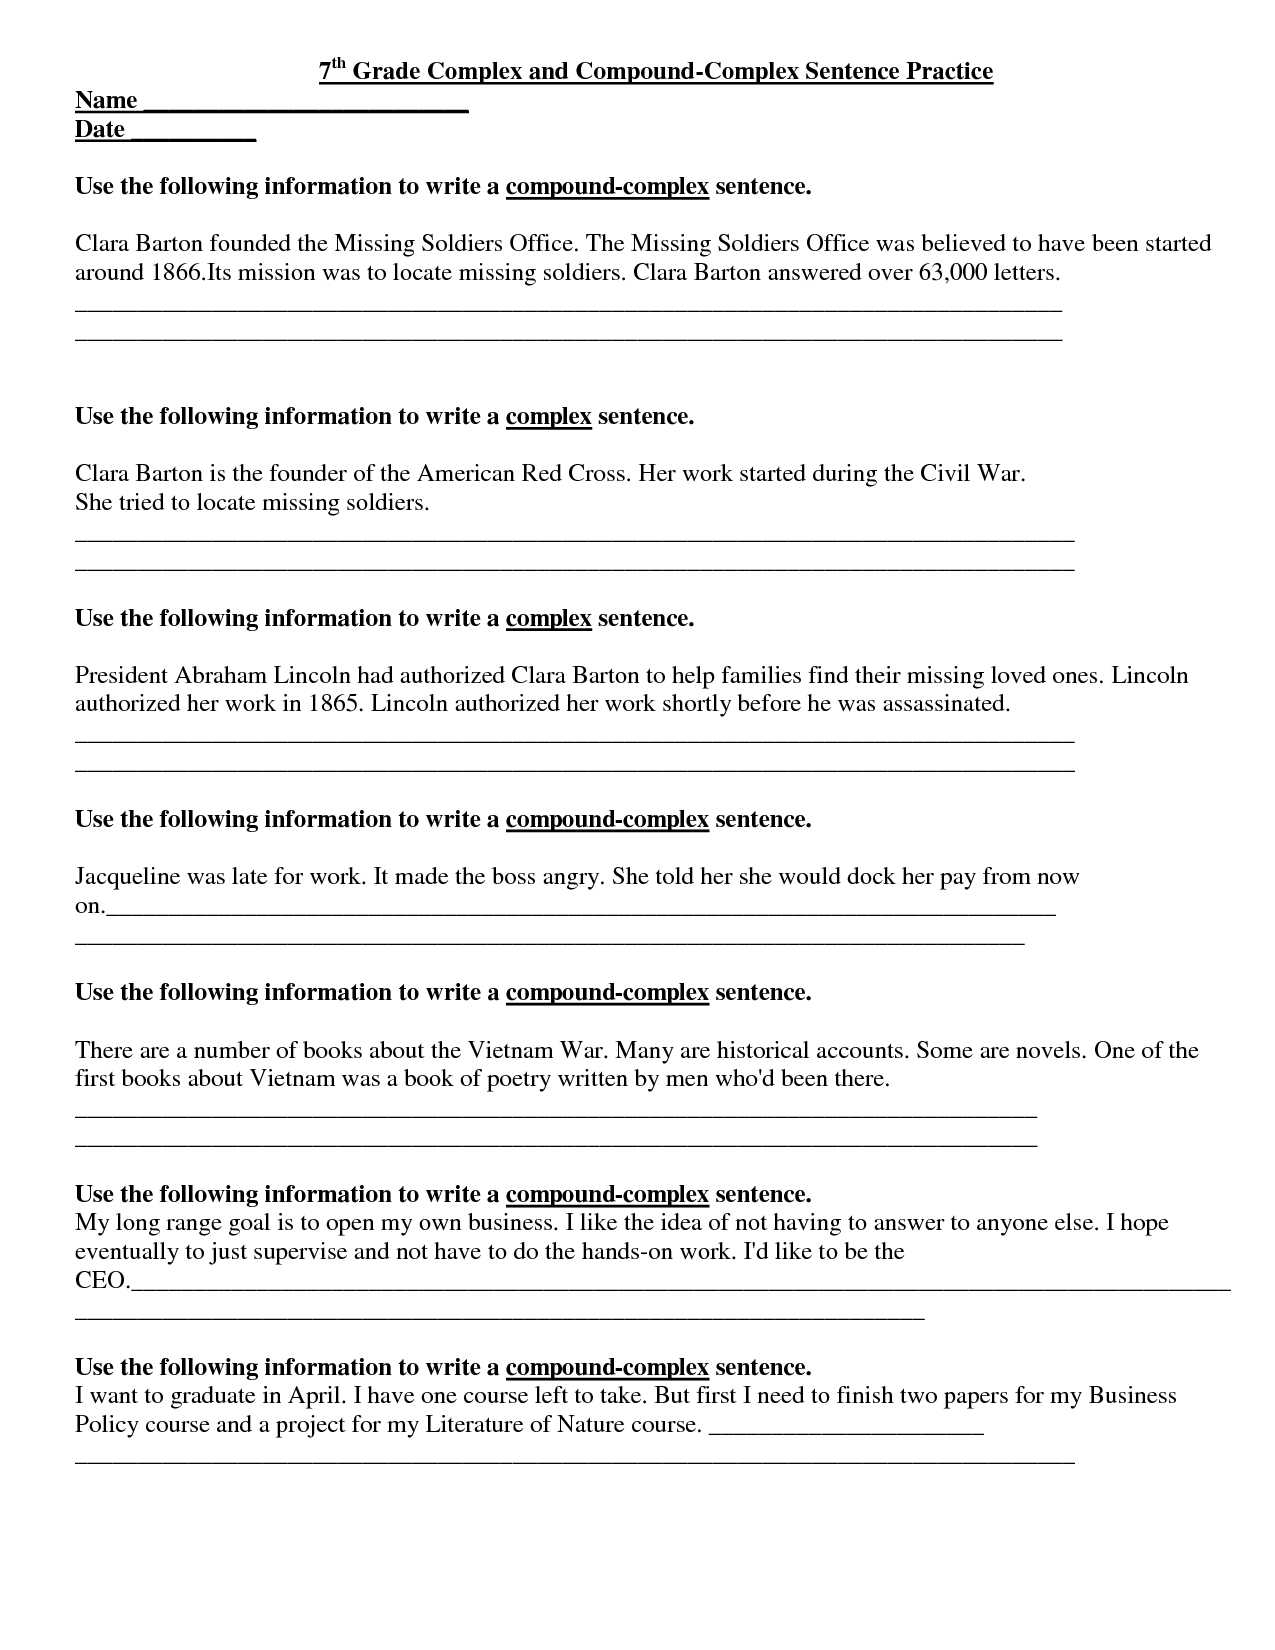 American Civil War Reading Comprehension Worksheet Answers together with 7th Grade Worksheets Free Printable Kidz Activities